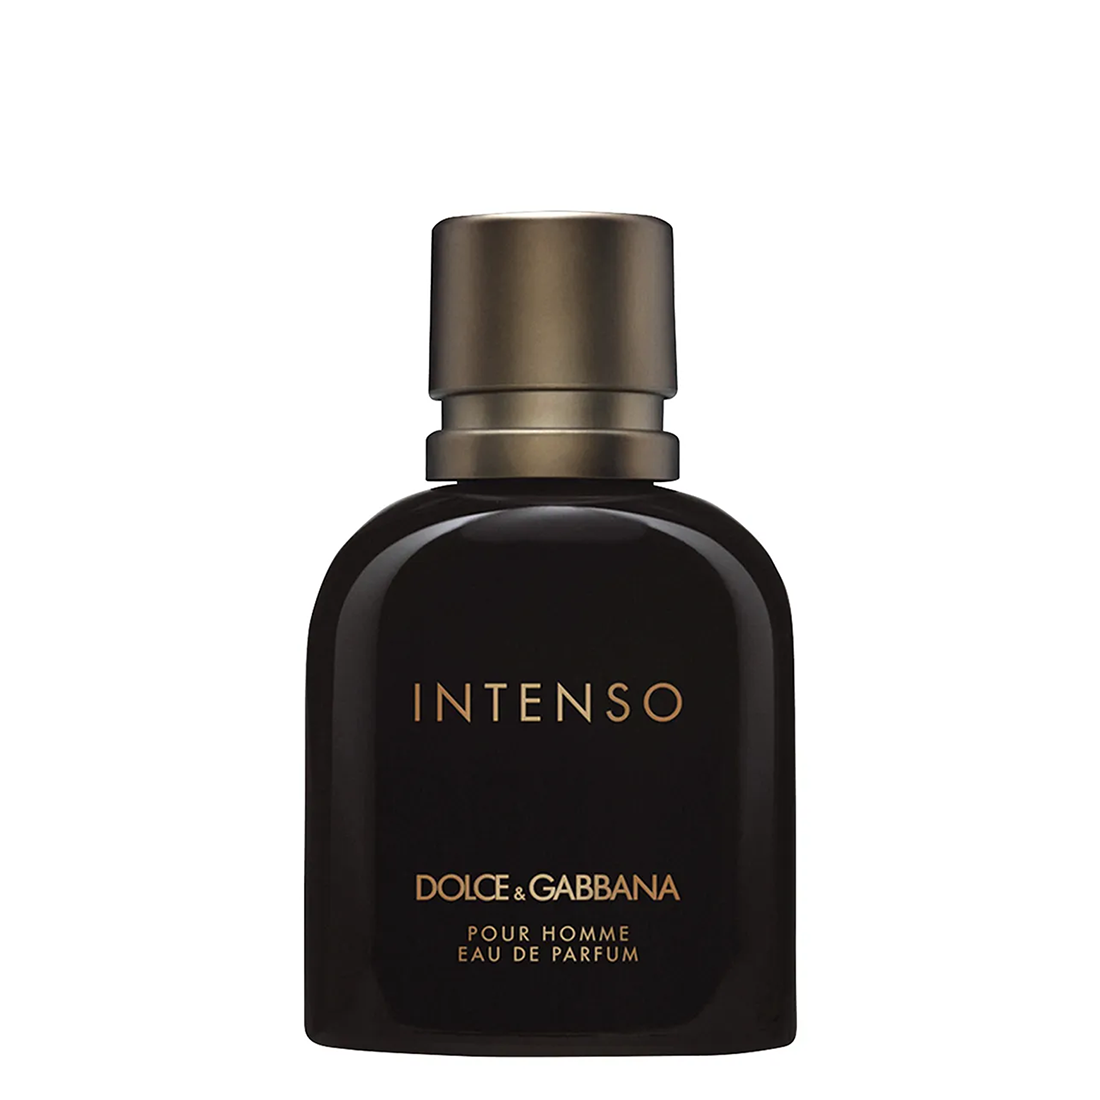 DOLCE&GABBANA INTENSO POUR HOMME